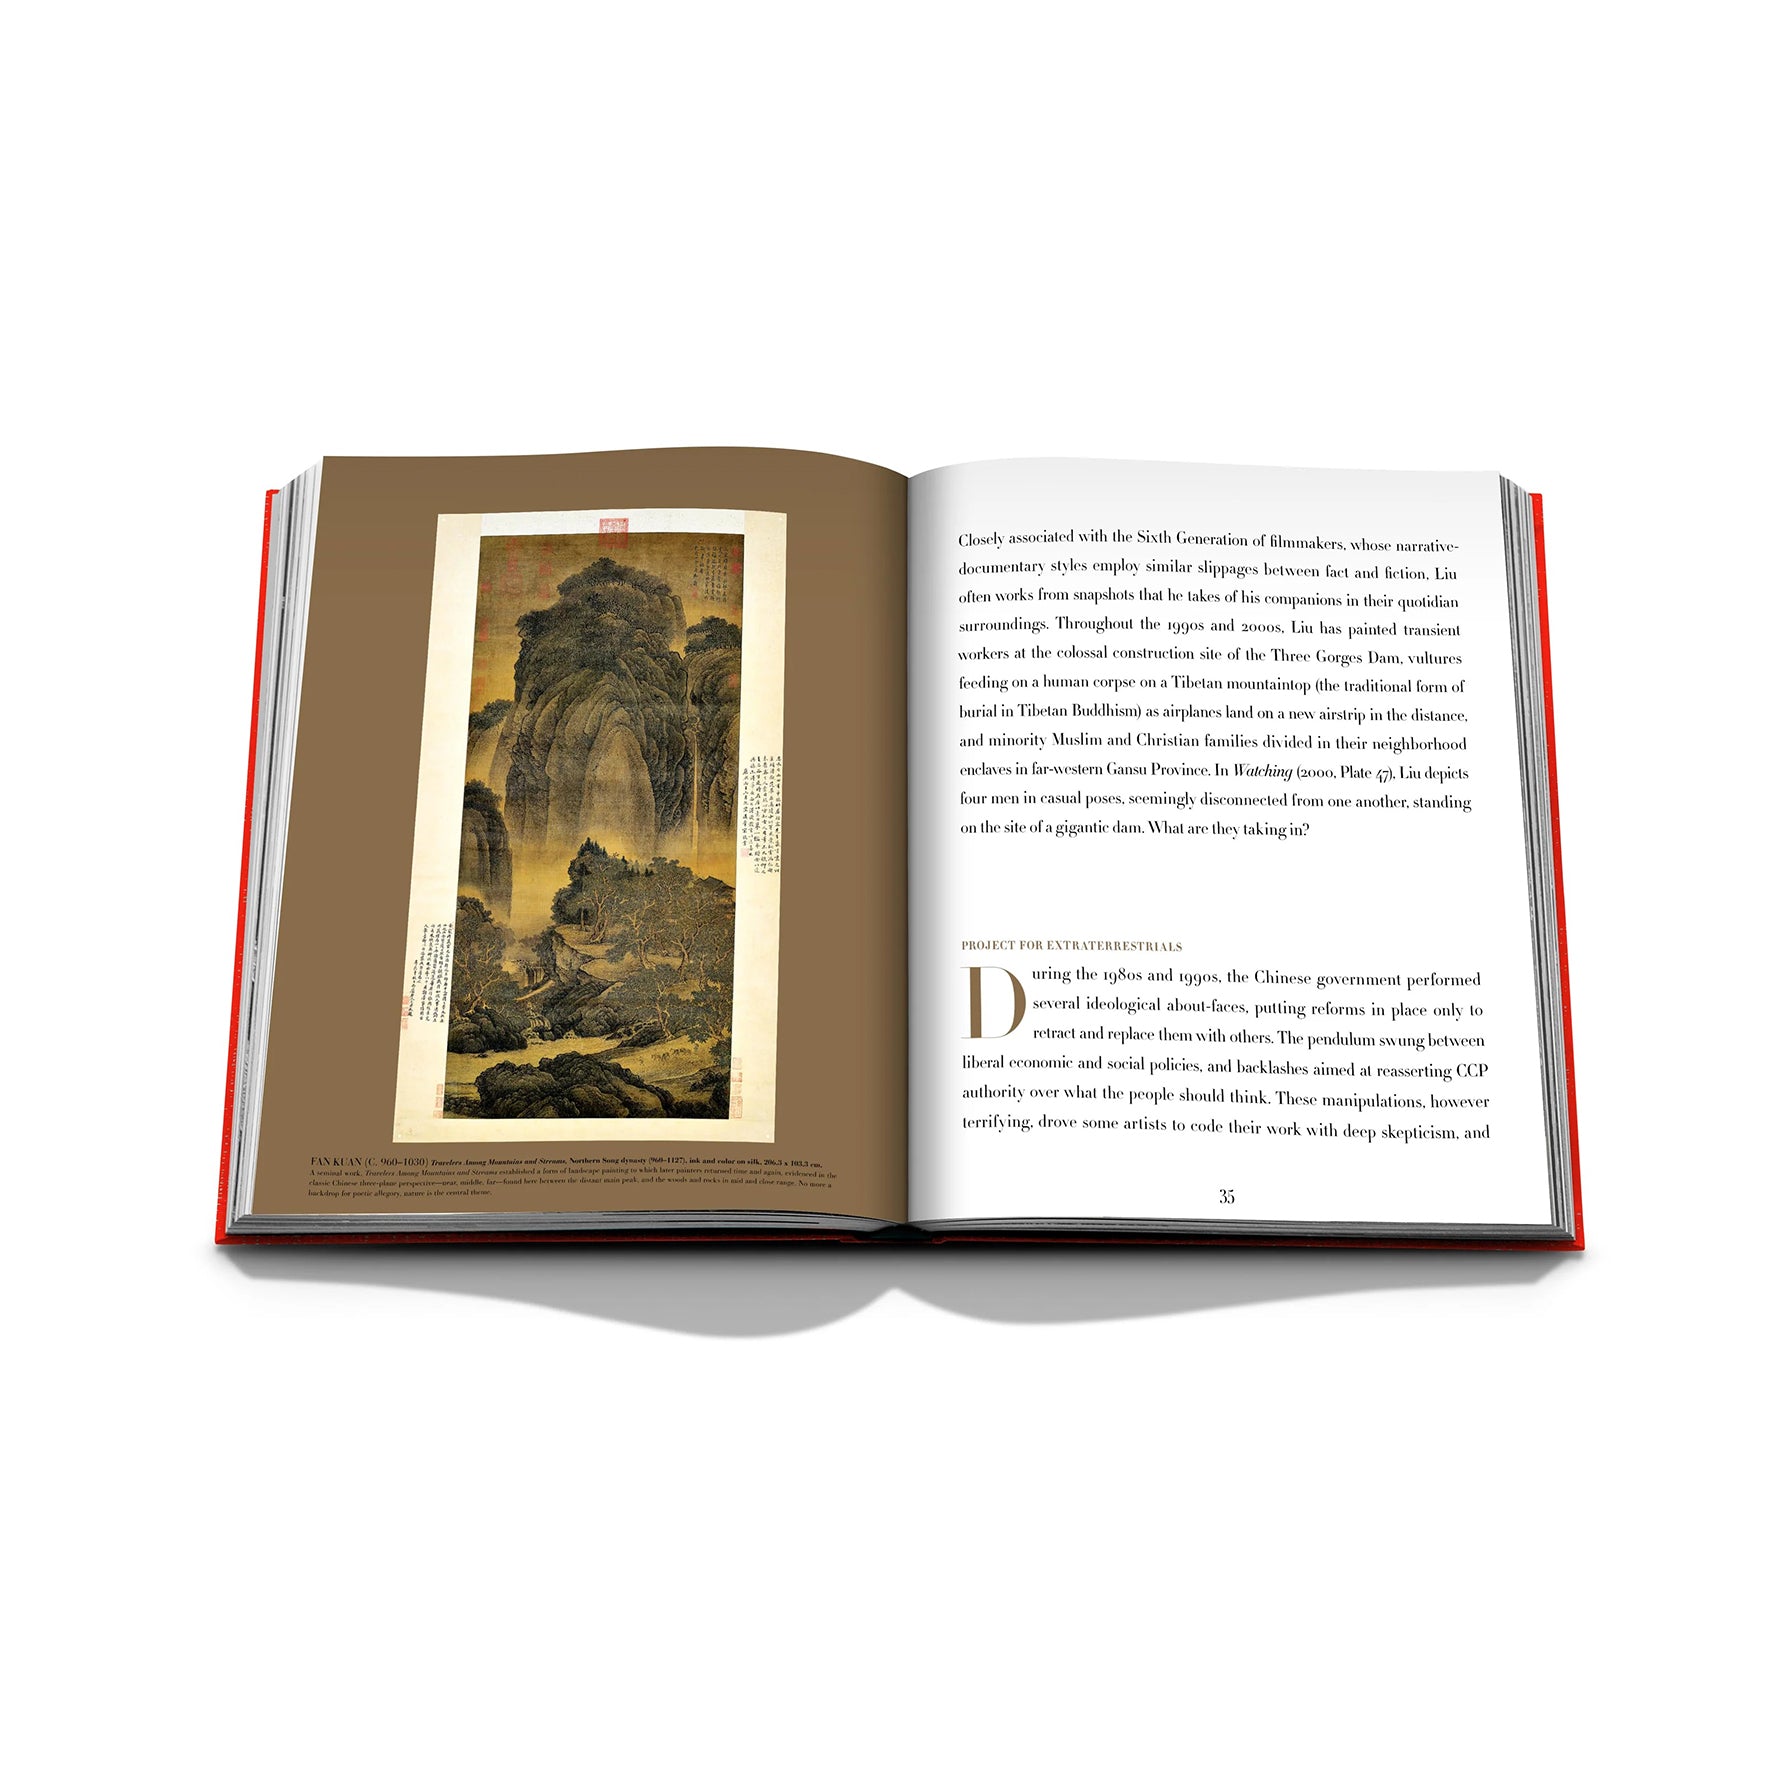 Chinese Art: The Impossible Collection - Assouline